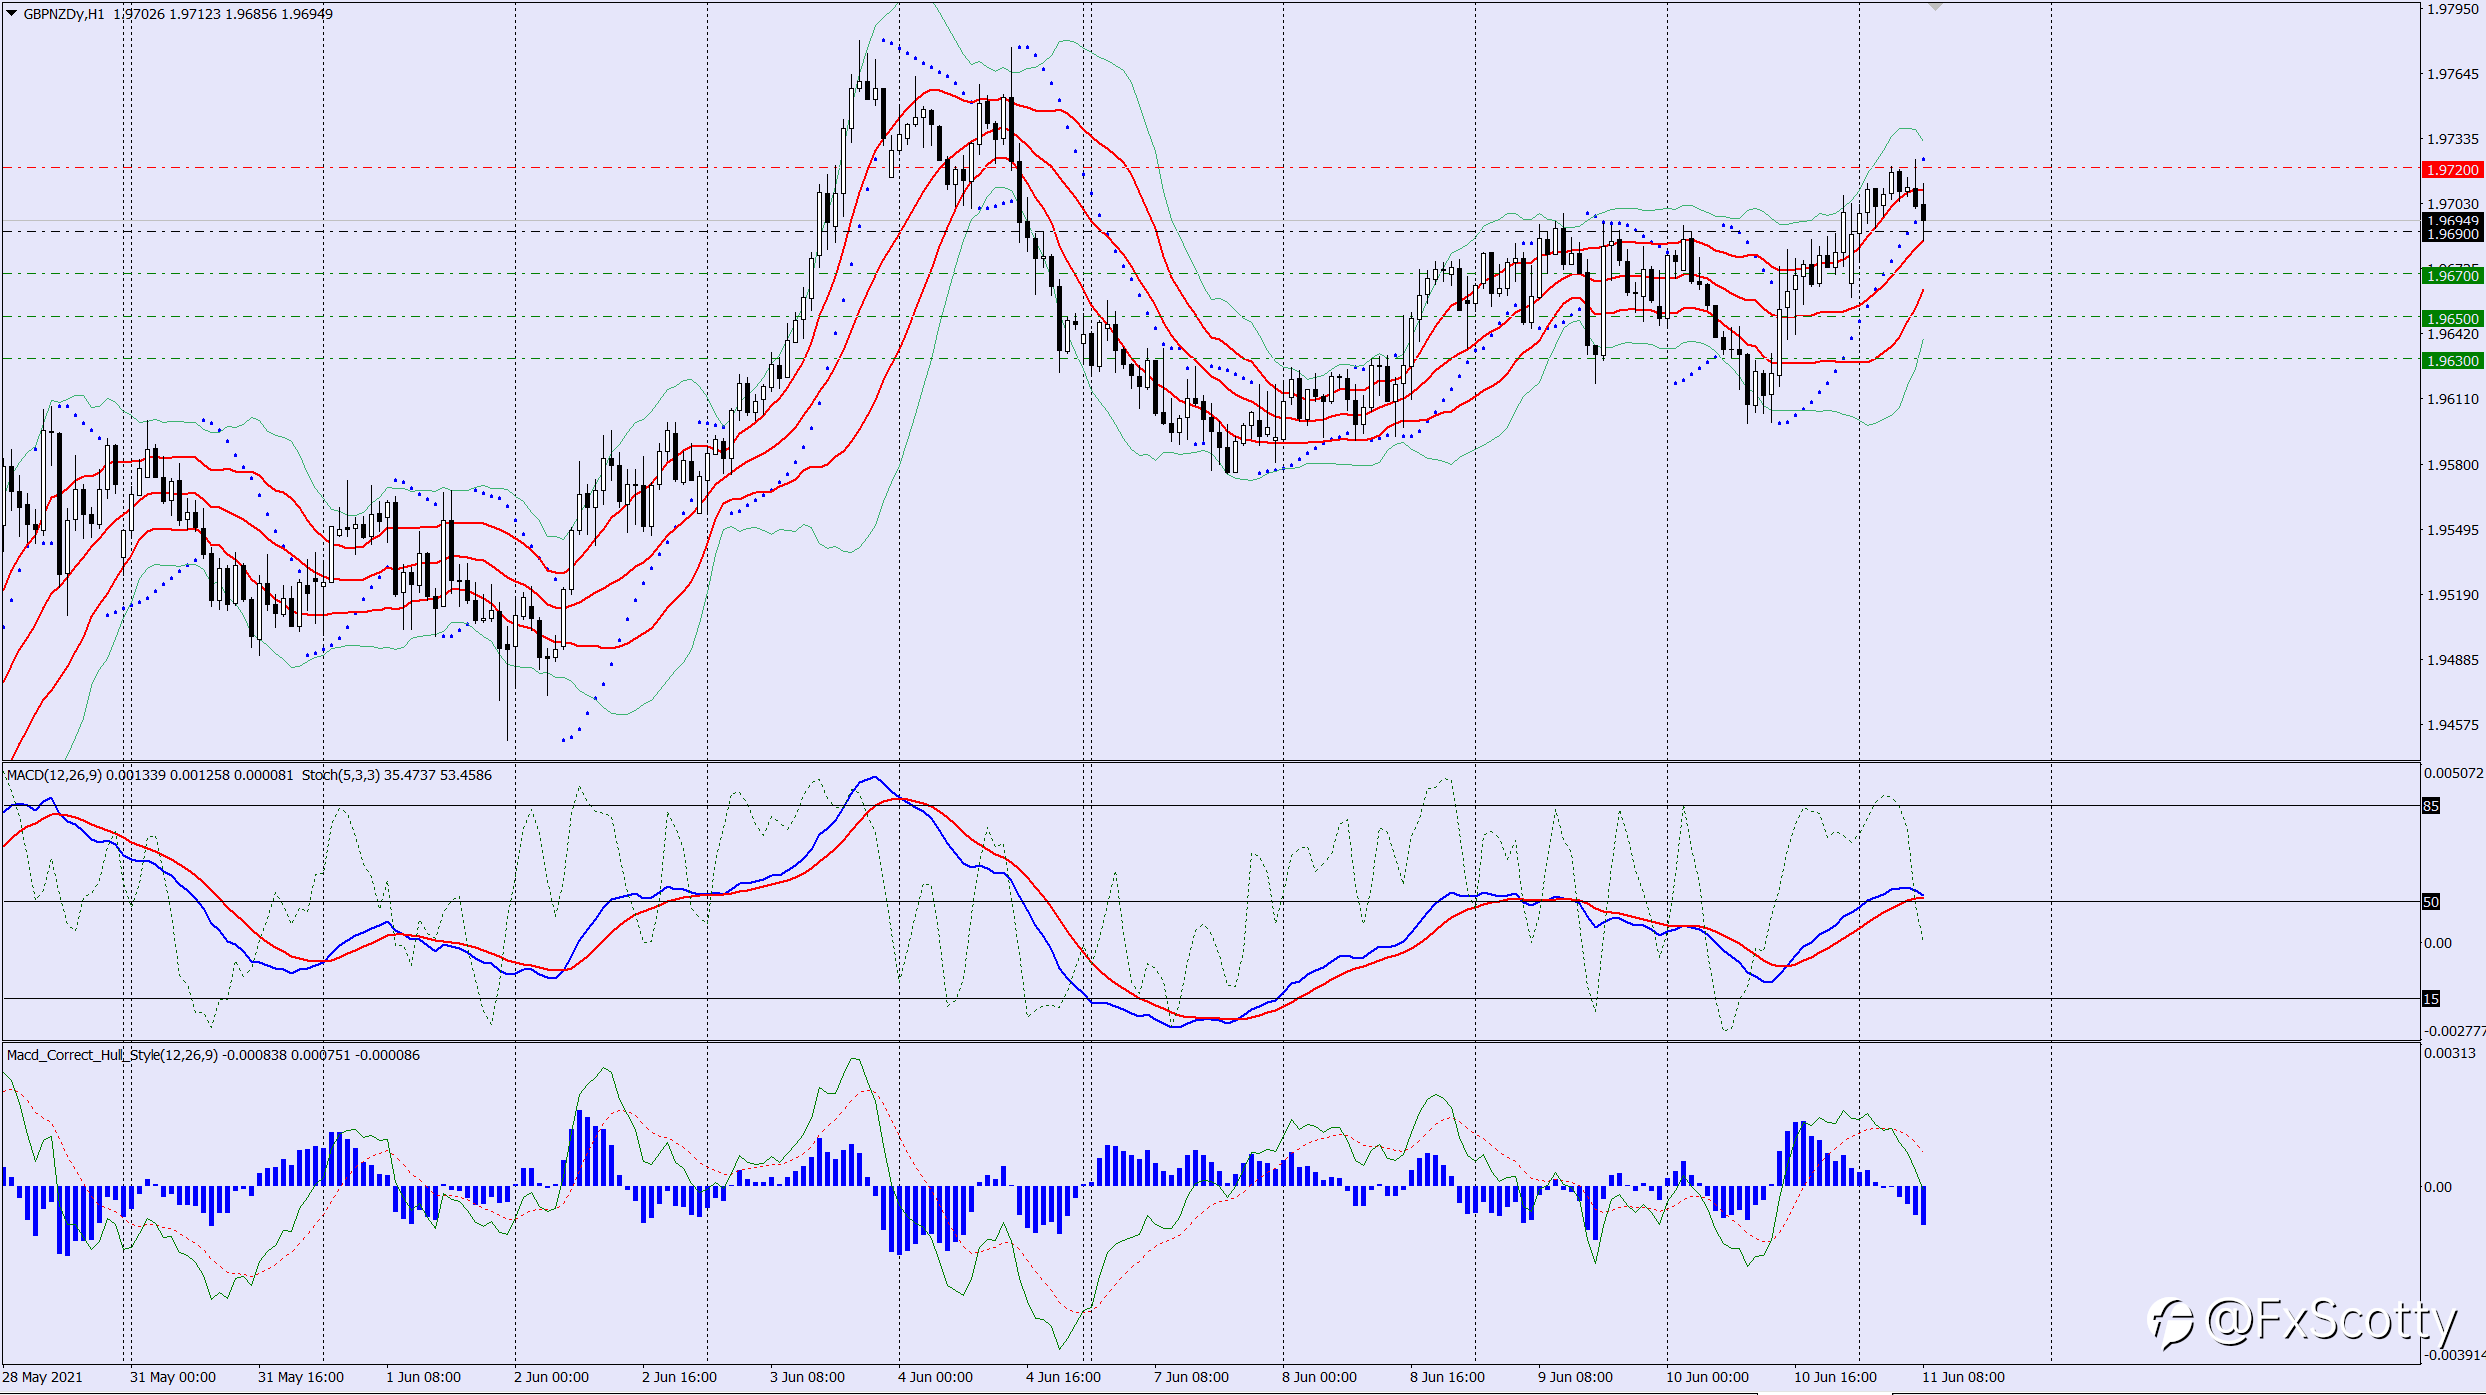 GBPNZD sell trade idea 11 06 2021